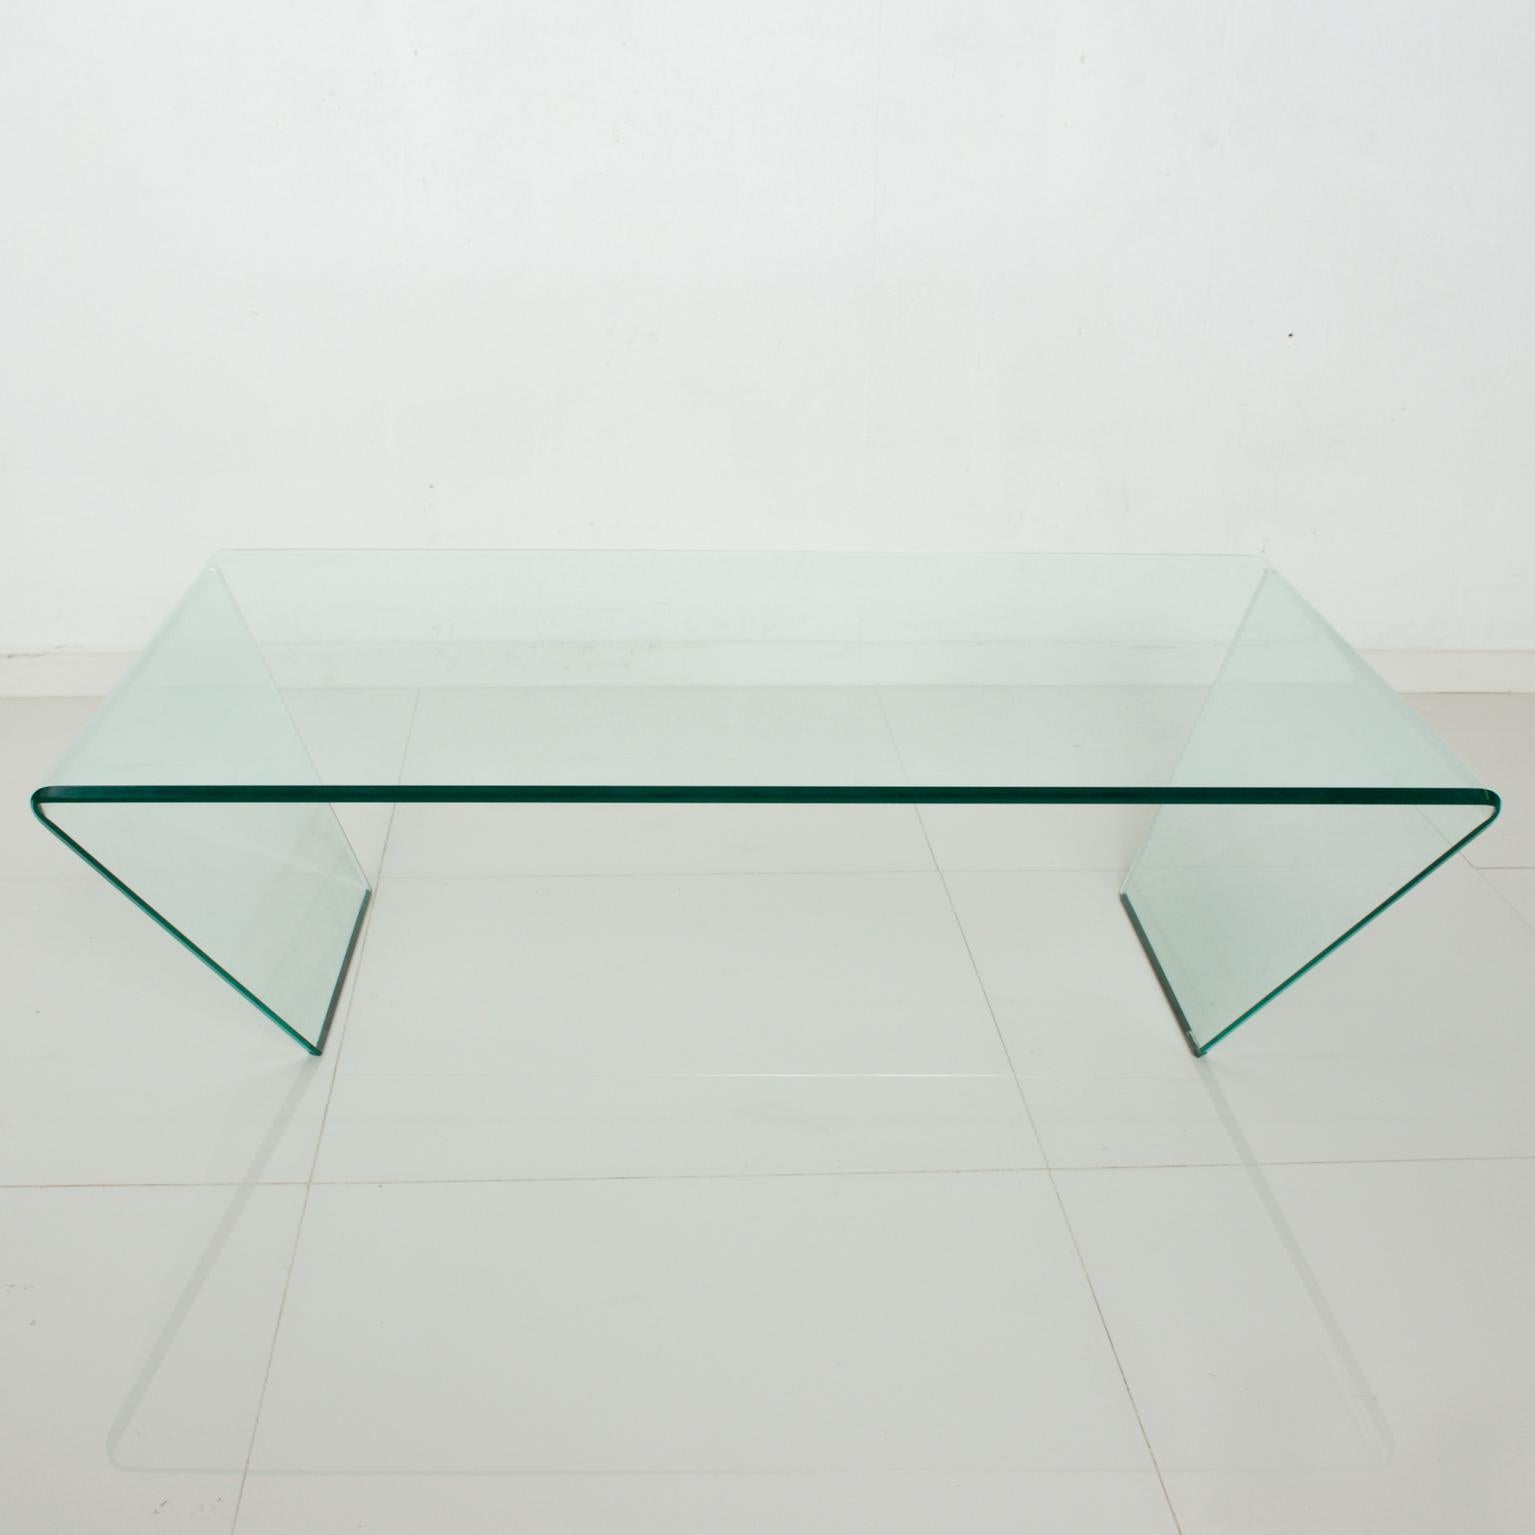 For your consideration: An angled striking very modern bent glass coffee cocktail table
Dimensions: 45